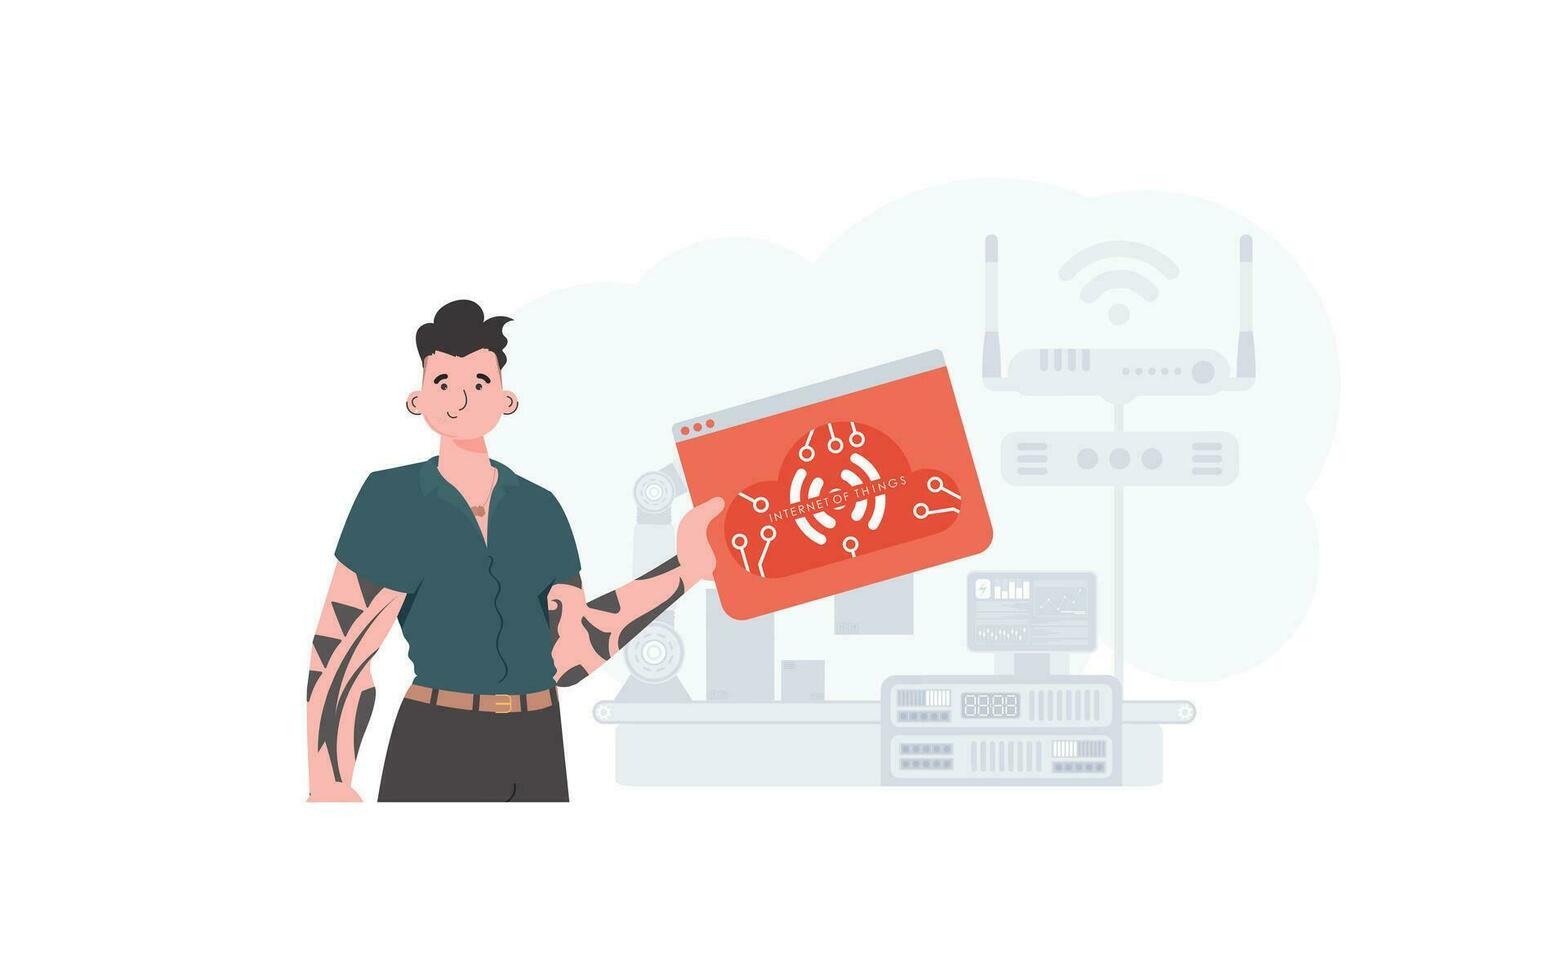 The guy is holding an internet thing icon in his hands. Internet of things concept. Good for websites and presentations. Vector illustration.